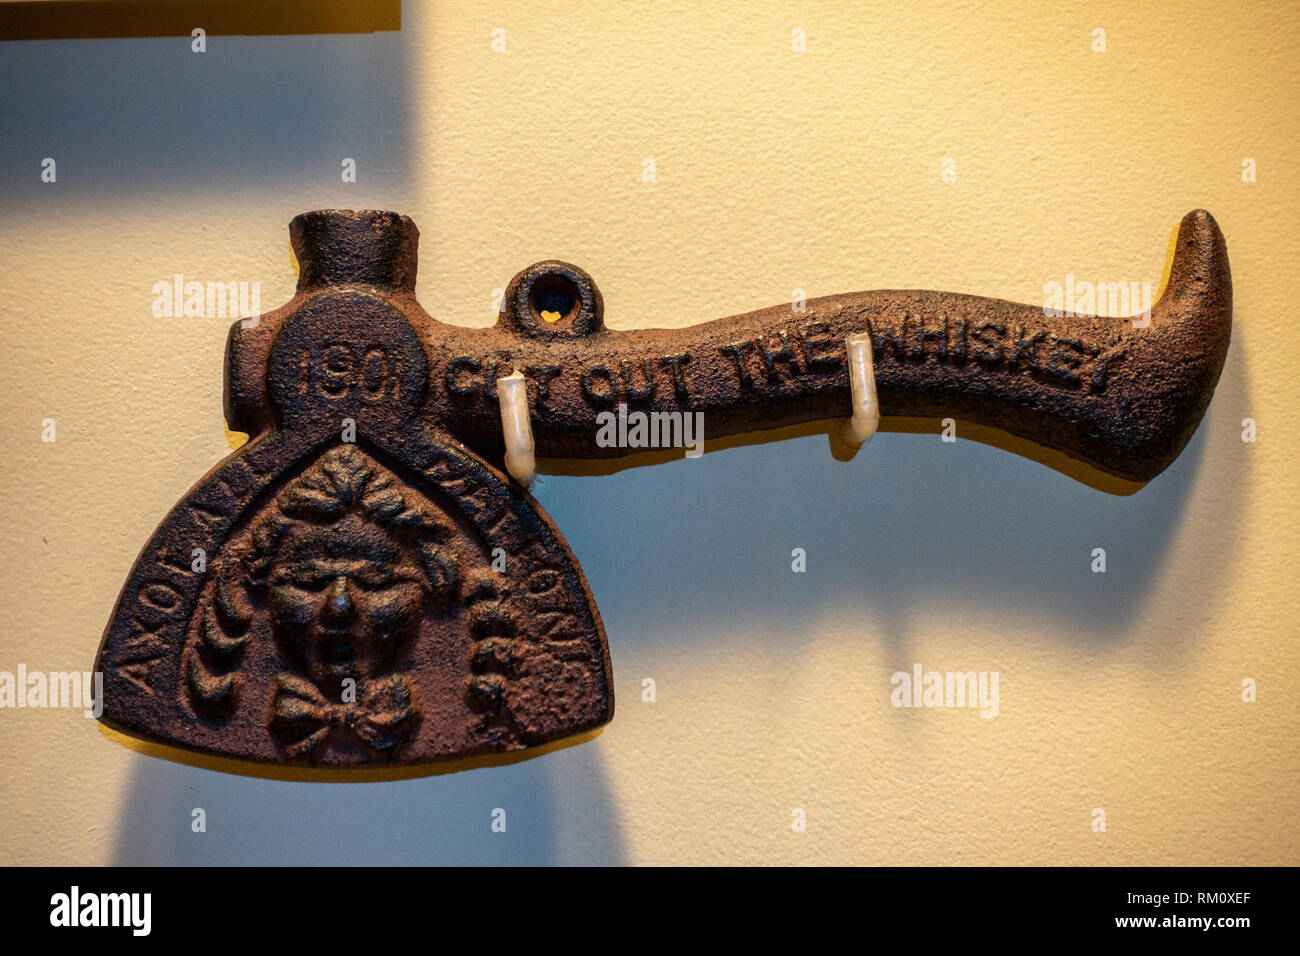 A Carrie Nation (temperance) hatchet, The Mob Museum, Las Vegas (City of Las Vegas), Nevada, United States. Stock Photo